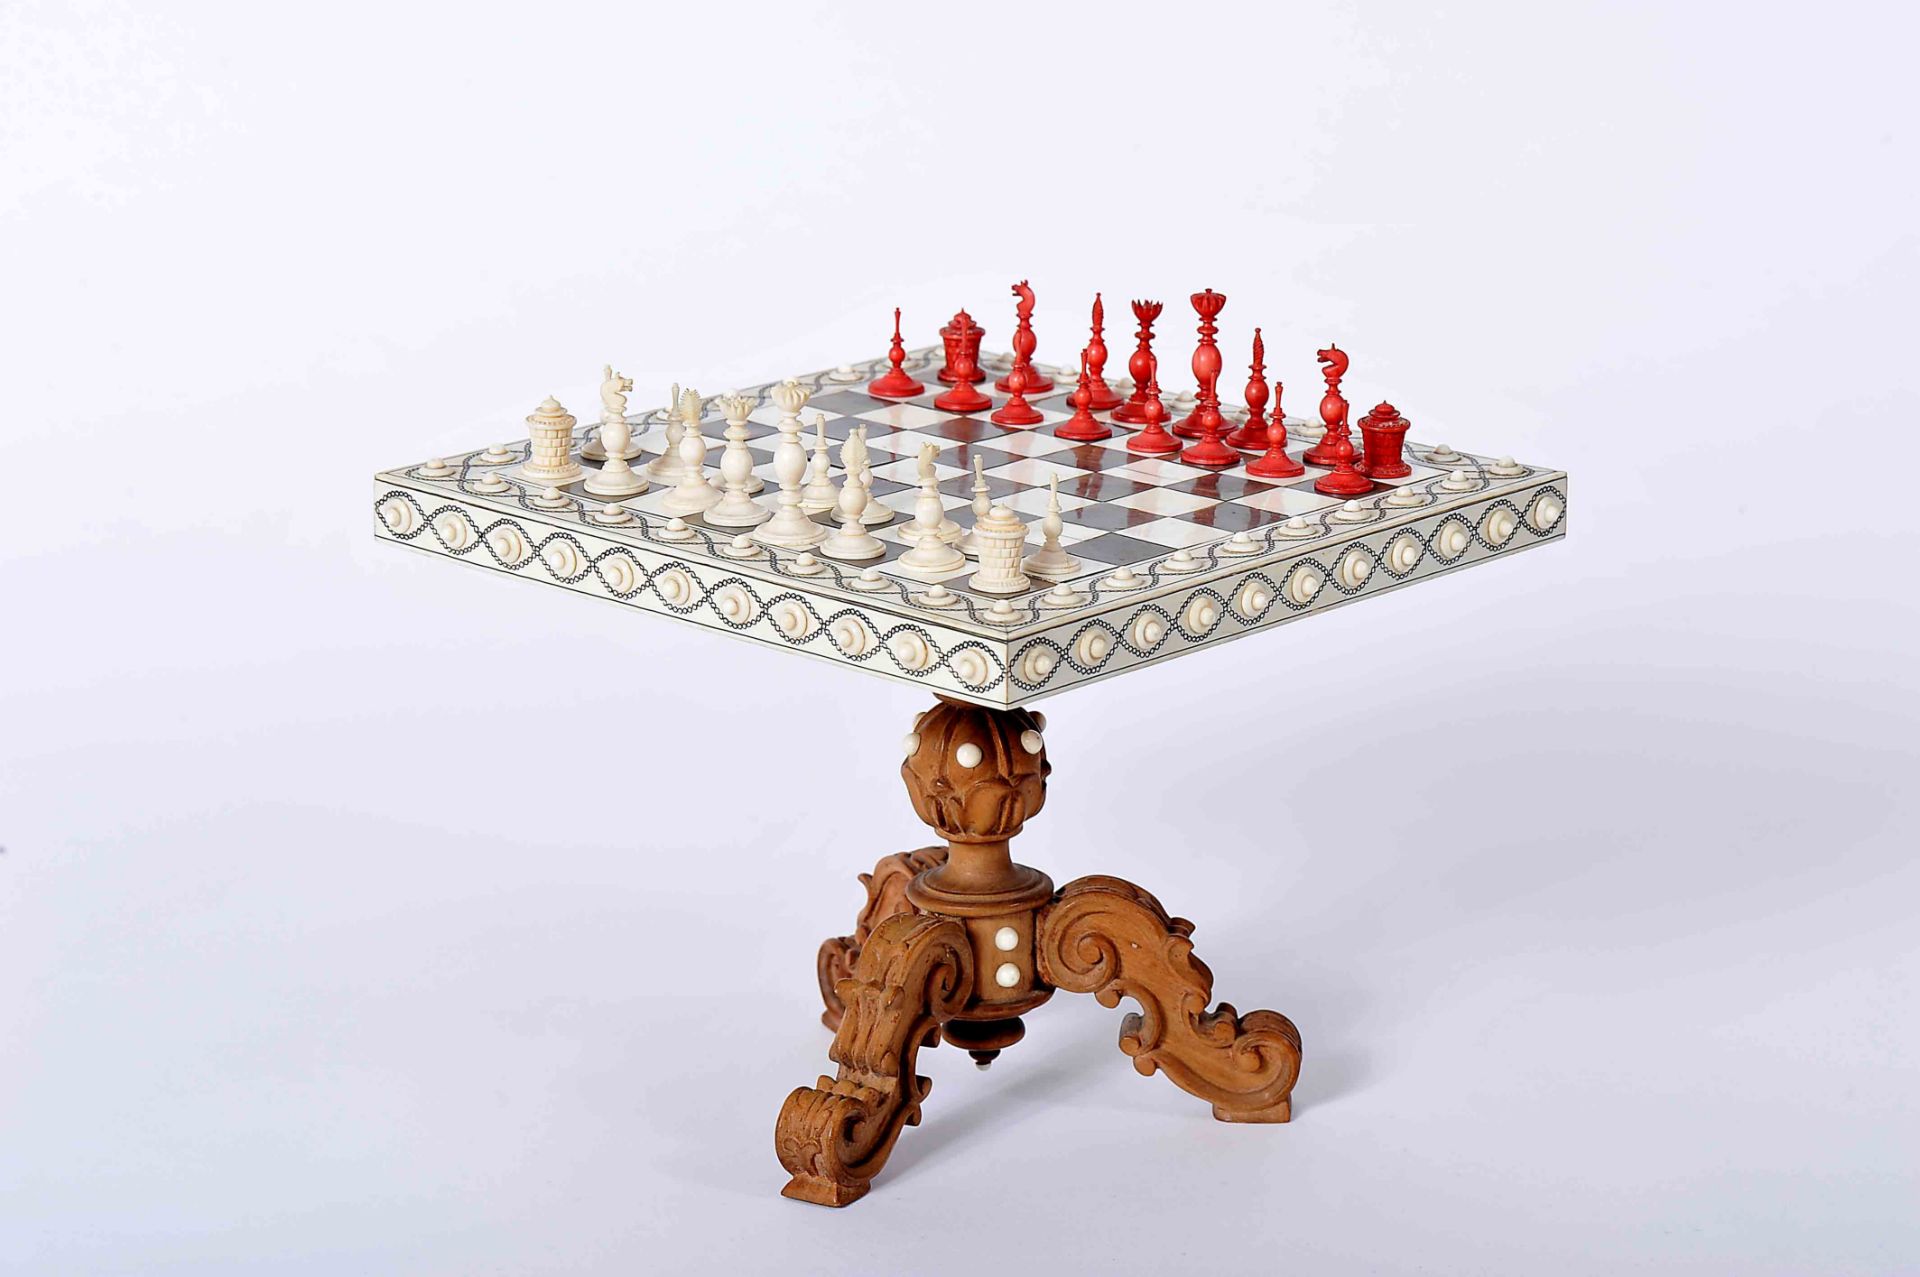 A miniature Game Table with miniature Chess Pieces